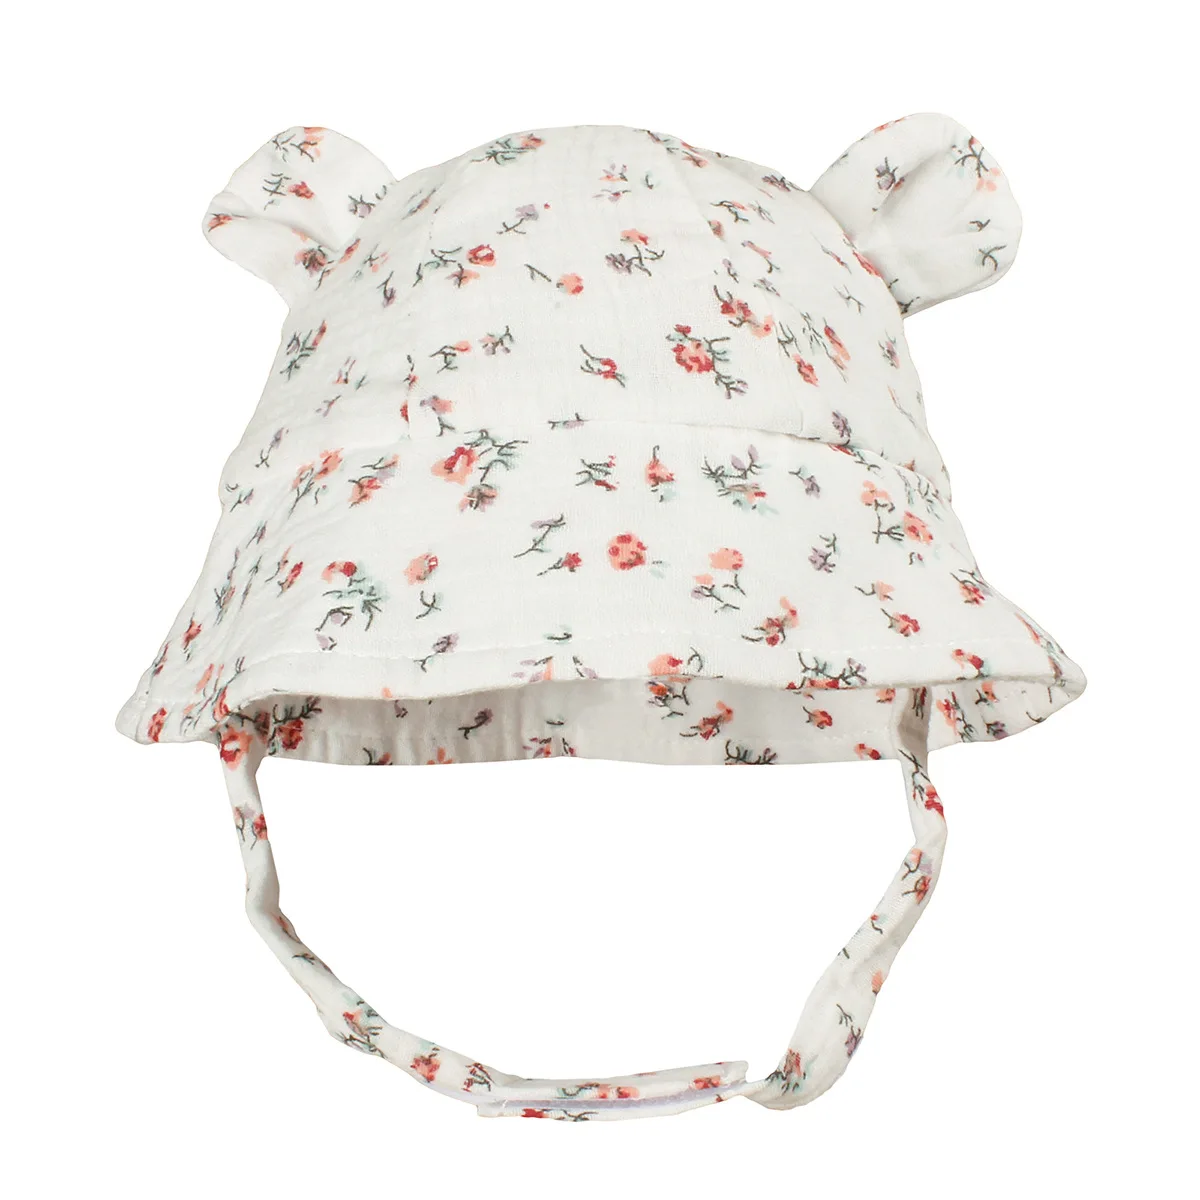 Kids Baby Breathable Sun Protection Bear Ear Breathable Muslin 100% Cotton Kids Toddler Fisherman Bucket Hats